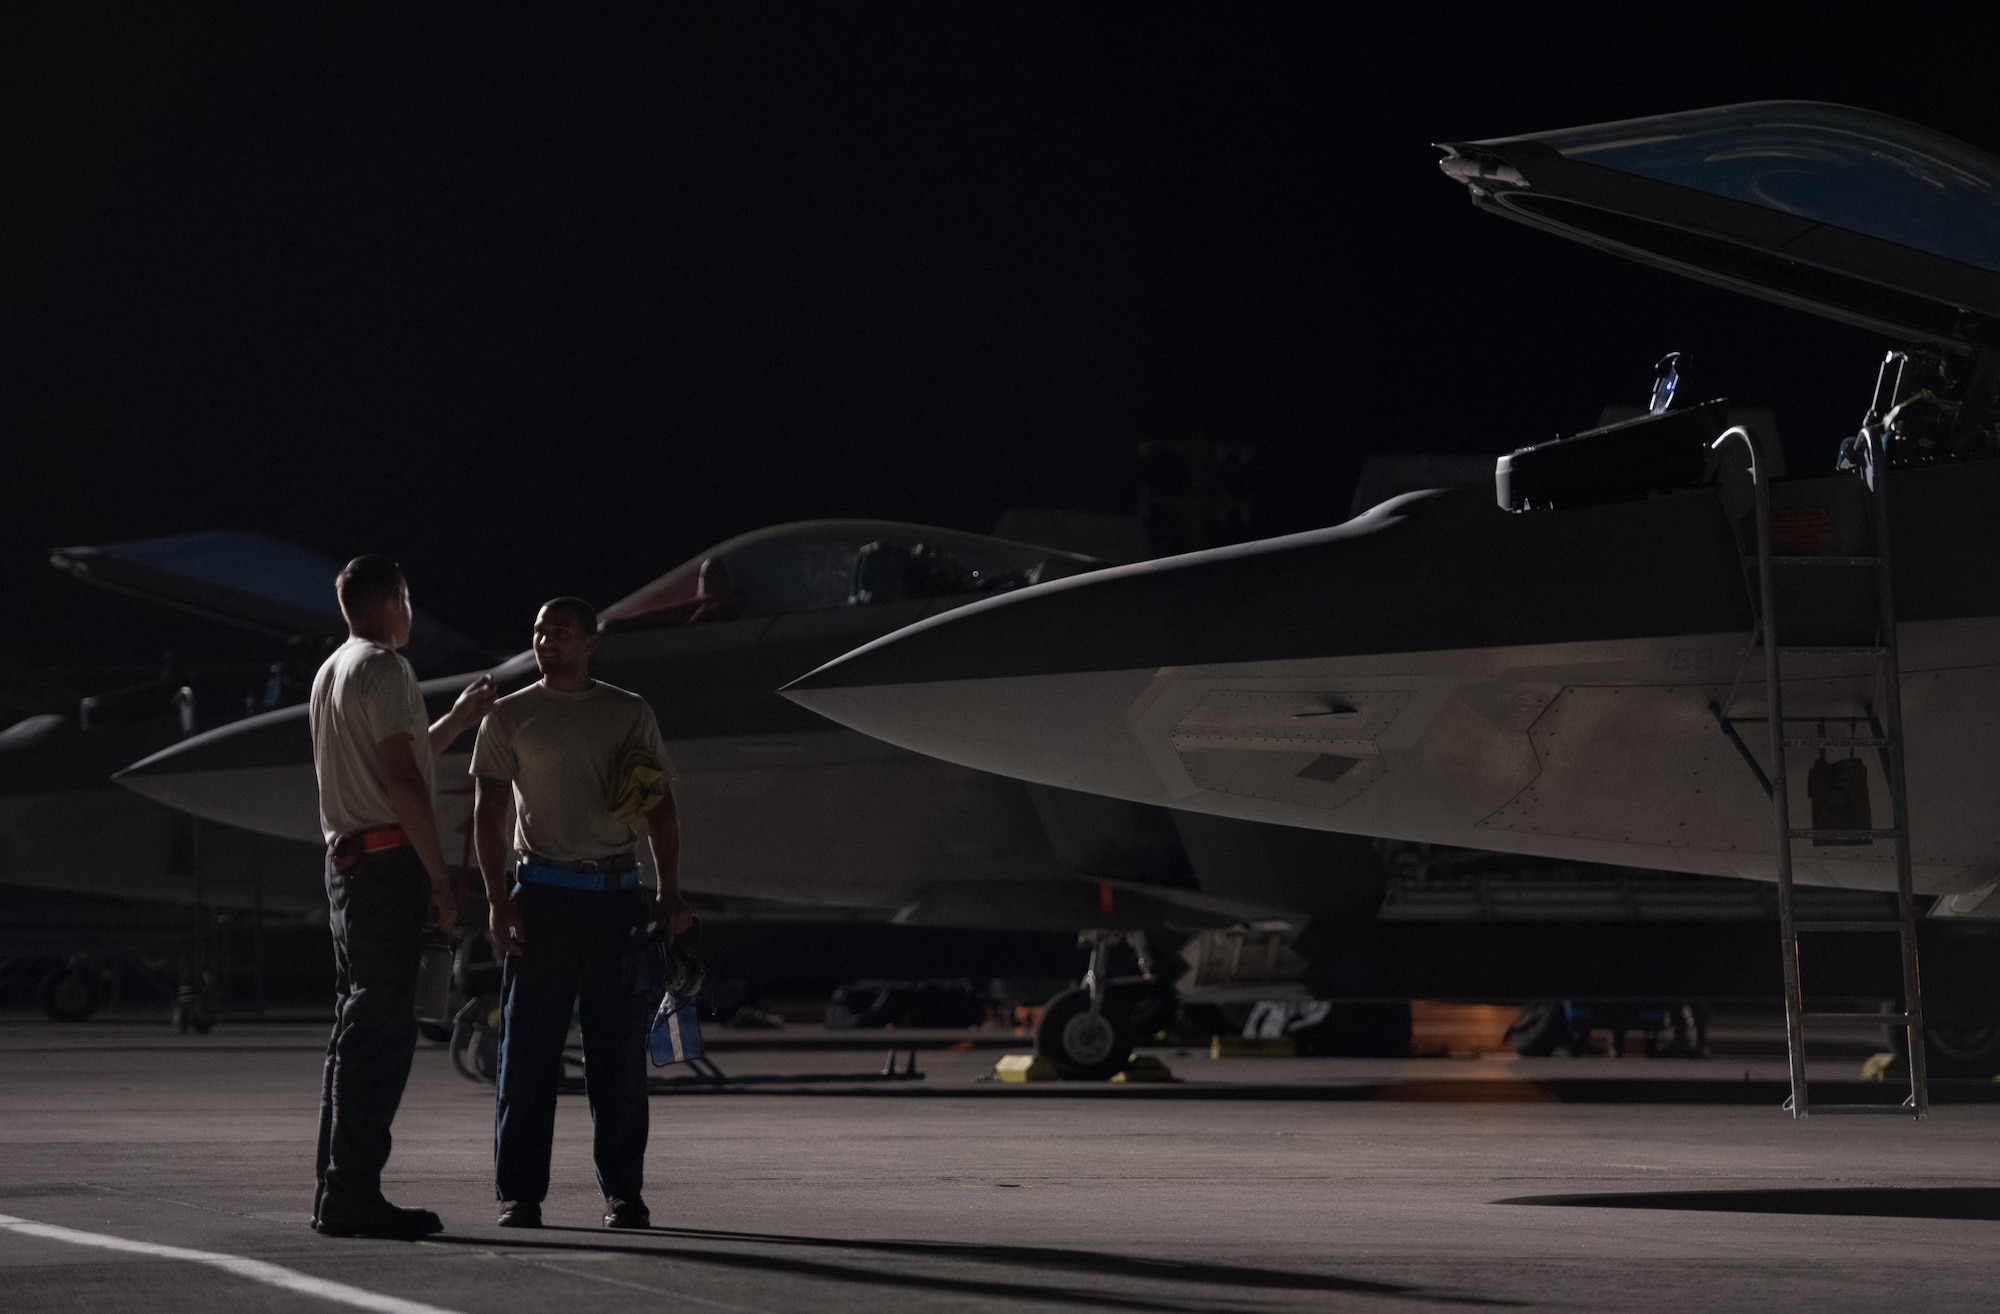 U.S Air Force Tech. Sgt. William Marioth, 192nd Aircraft Maintenance Squadron and Staff Sgt. Jonathon Millan, 94th Aircraft Maintenance Unit crew chiefs, discuss shift change during Red Flag 17-4 at Nellis Air Force Base, Nev., Aug. 21, 2017. The deployed maintenance unit to Red Flag is comprised of Airmen from the 94th Aircraft Maintenance Unit, 27th Maintenance Unit and the 192nd Aircraft Maintenance Squadron, making the team total force integrated as one effort.  (U.S. Air Force photo by Staff Sgt. Carlin Leslie)